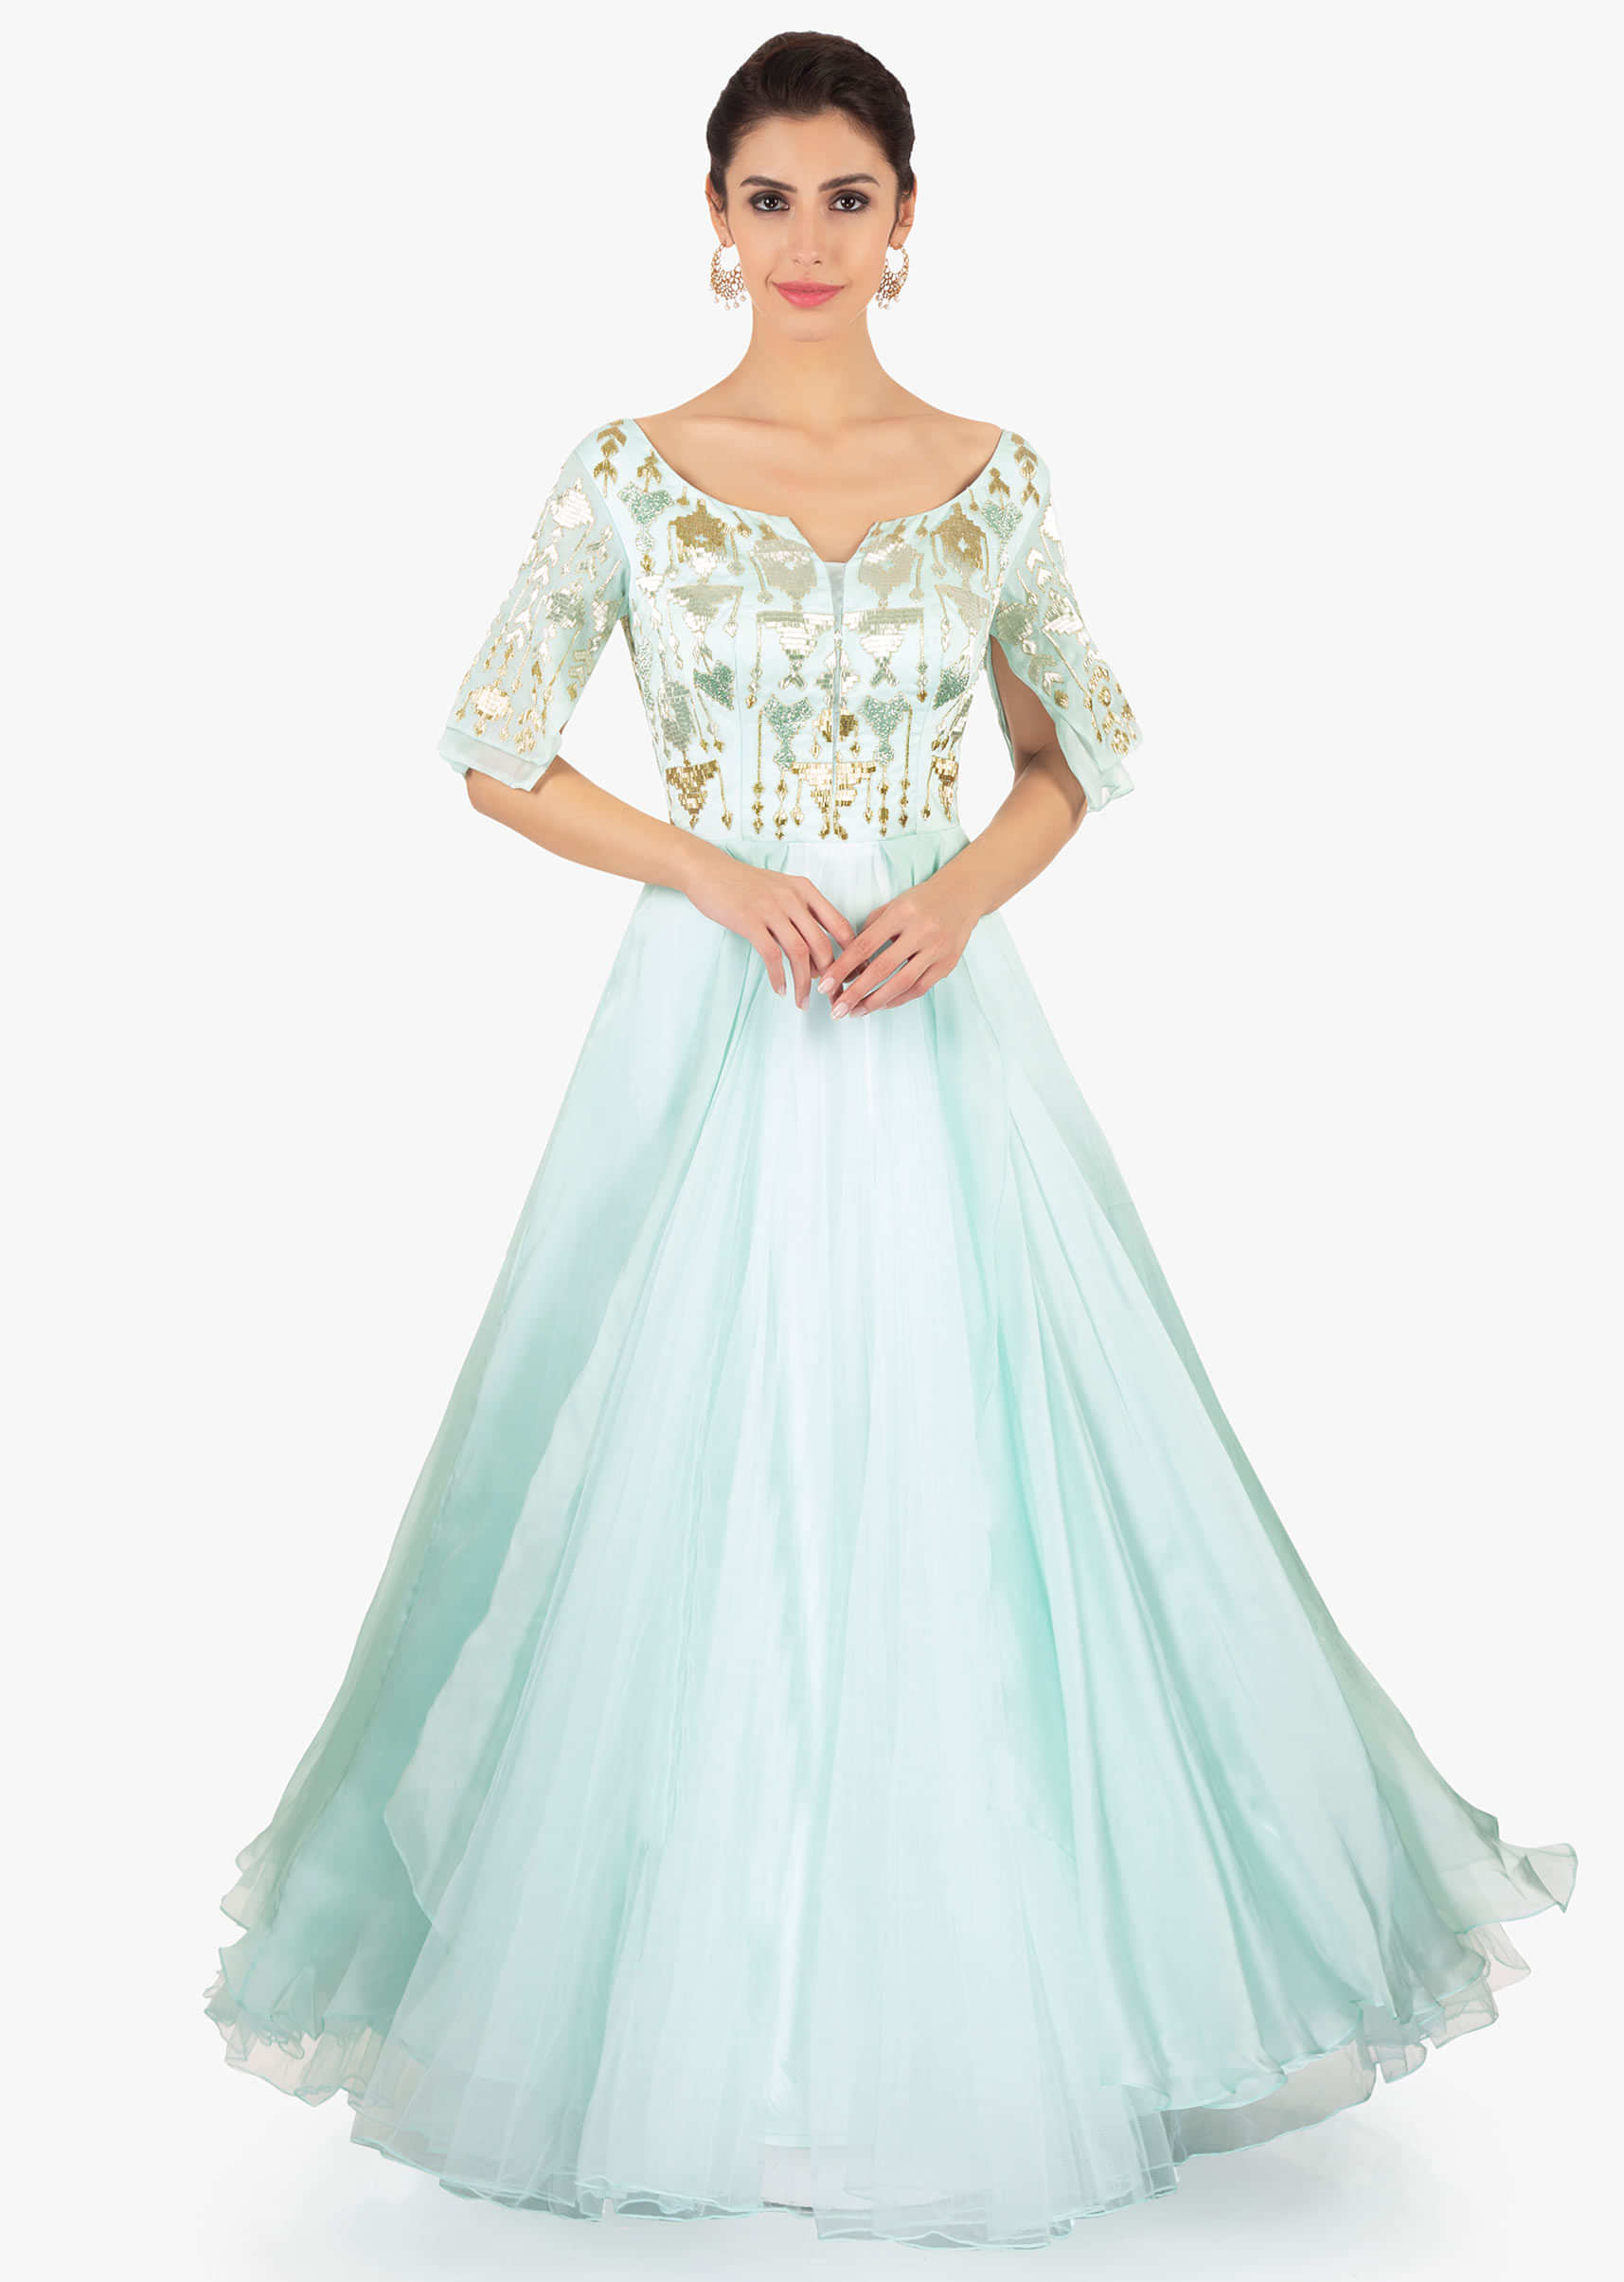 Mint green gown designed with over lapping sleeves and layers 